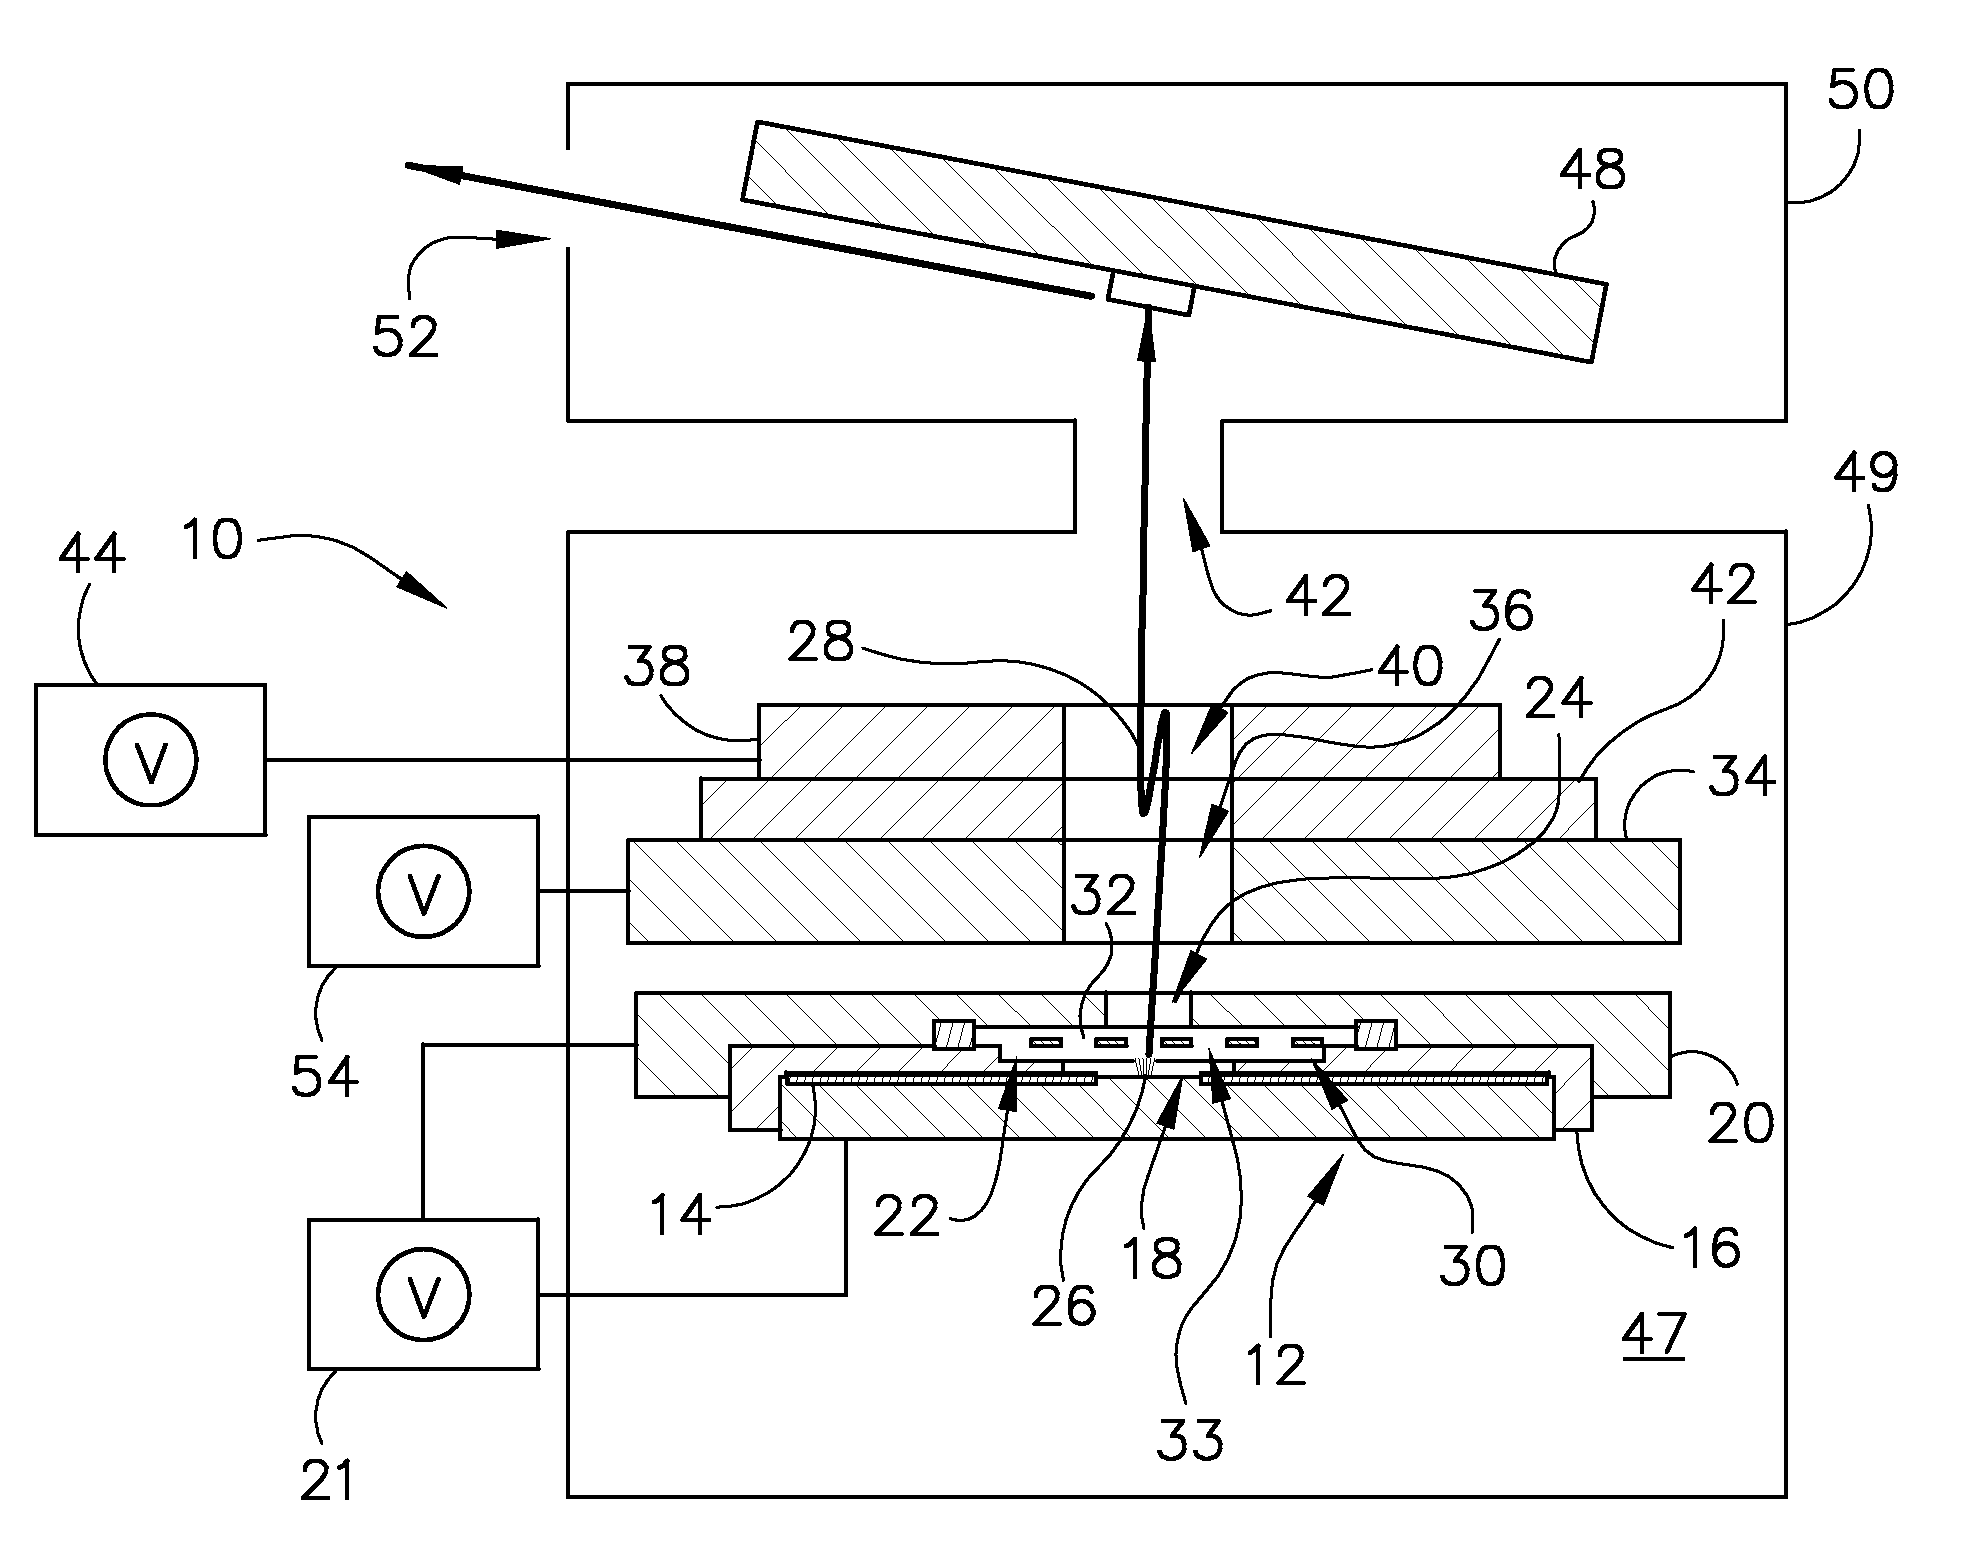 Apparatus for modifying electron beam aspect ratio for x-ray generation